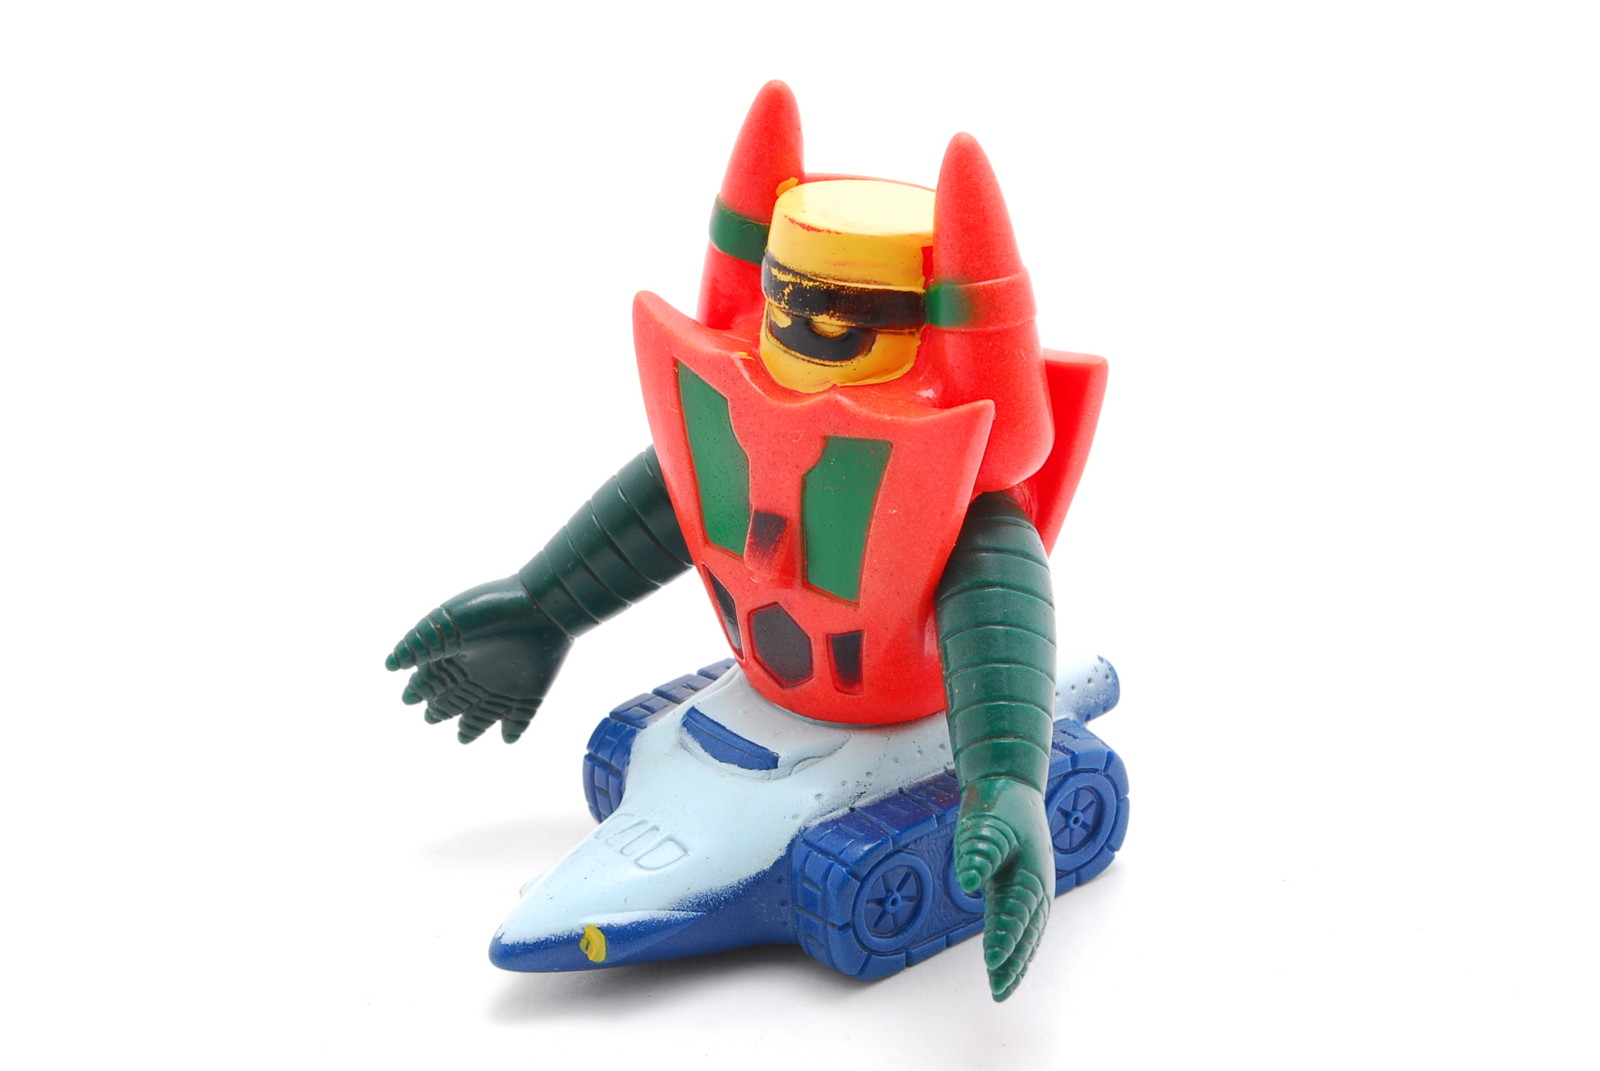 PROMOTION. EXC+4 Popy Getter Robo Getter 3 Three Sofbi Action Figure from Japan